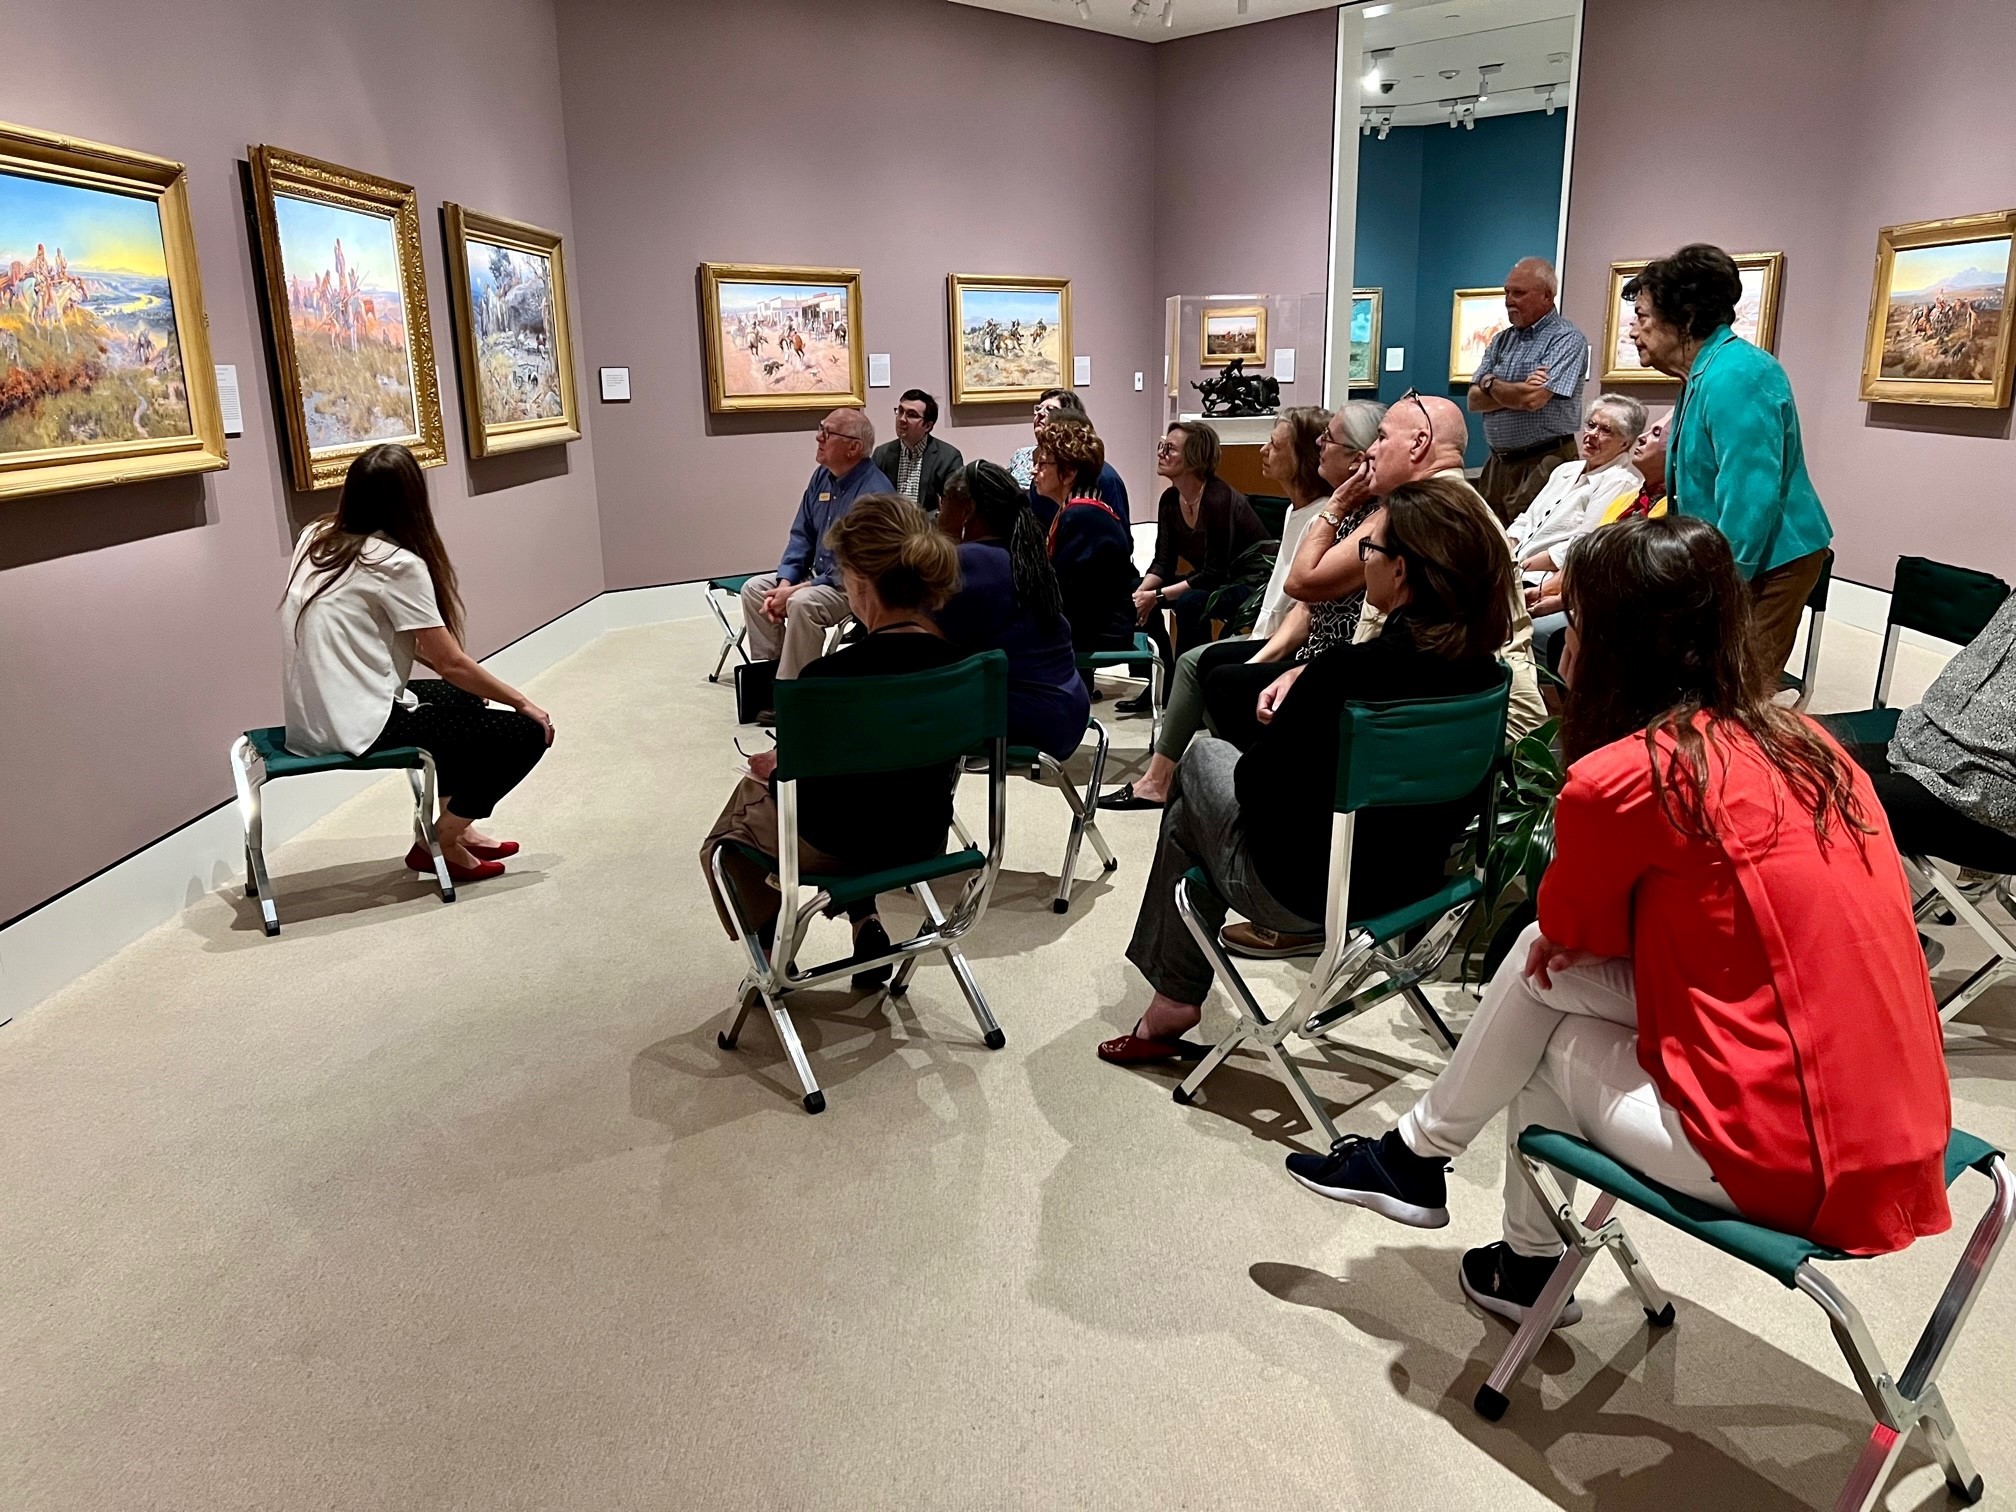 a group of people sitting in front of and looking at a painting